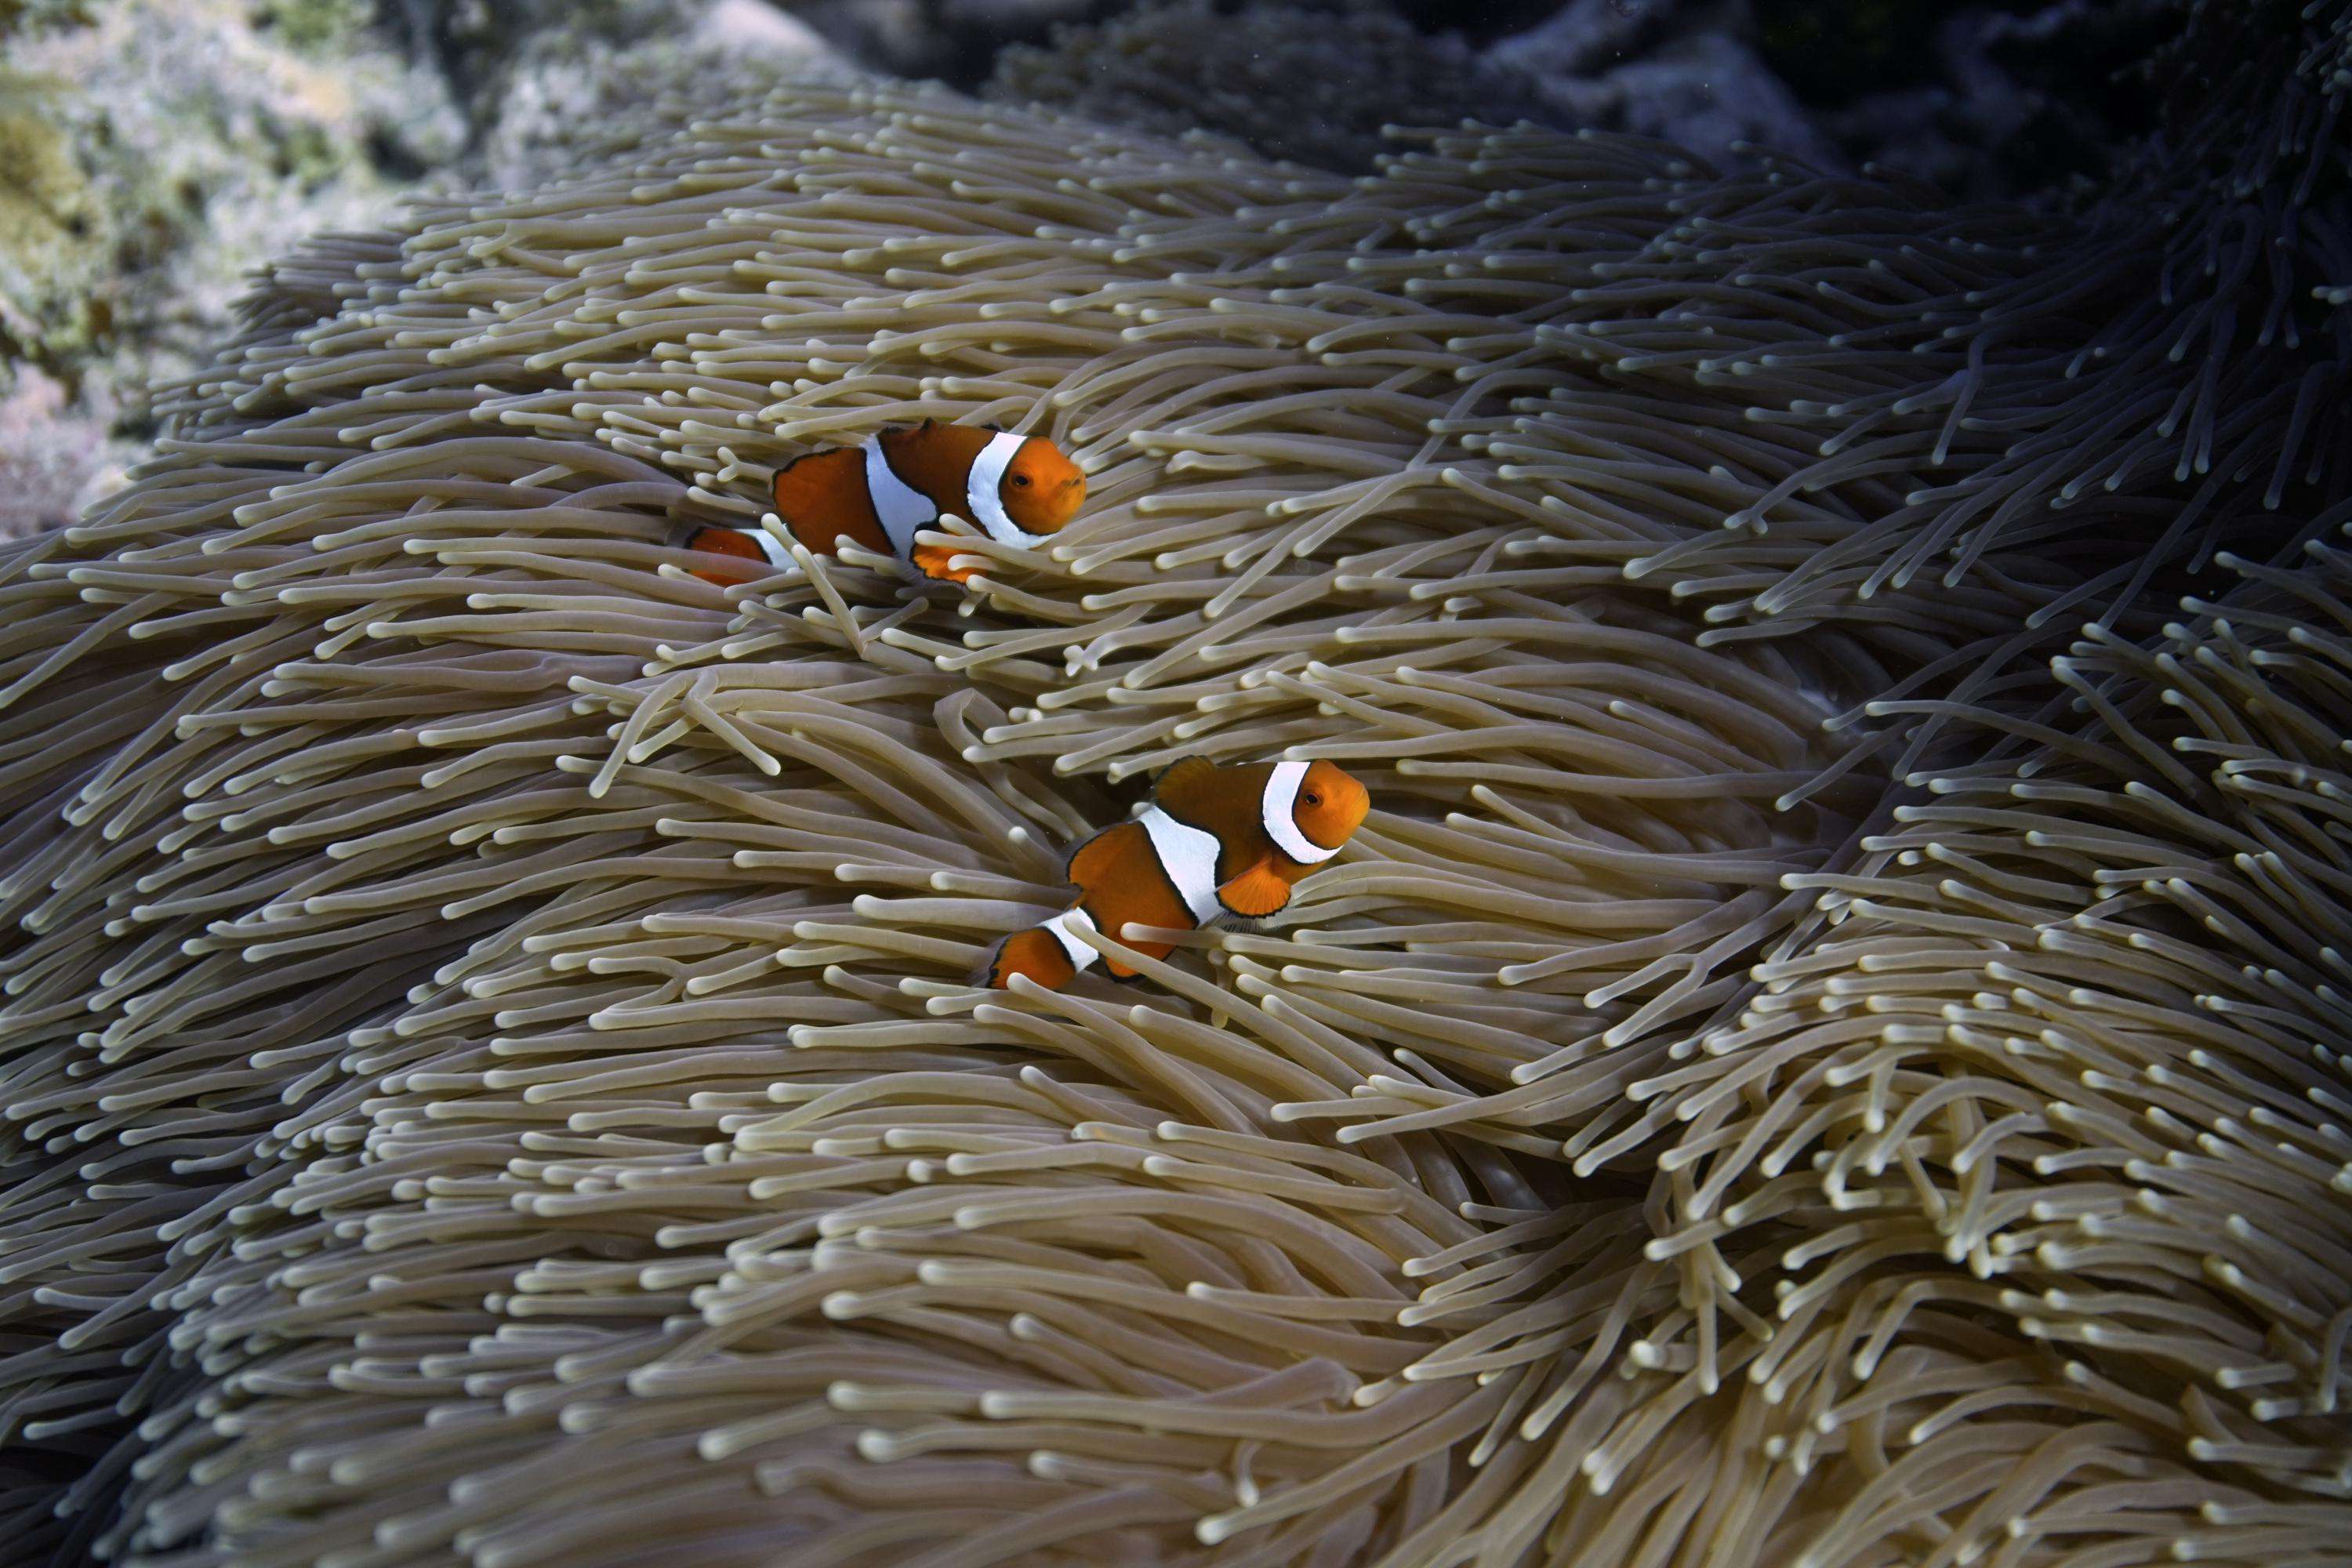 What Is The Relationship Between Clownfish And Sea Anemone